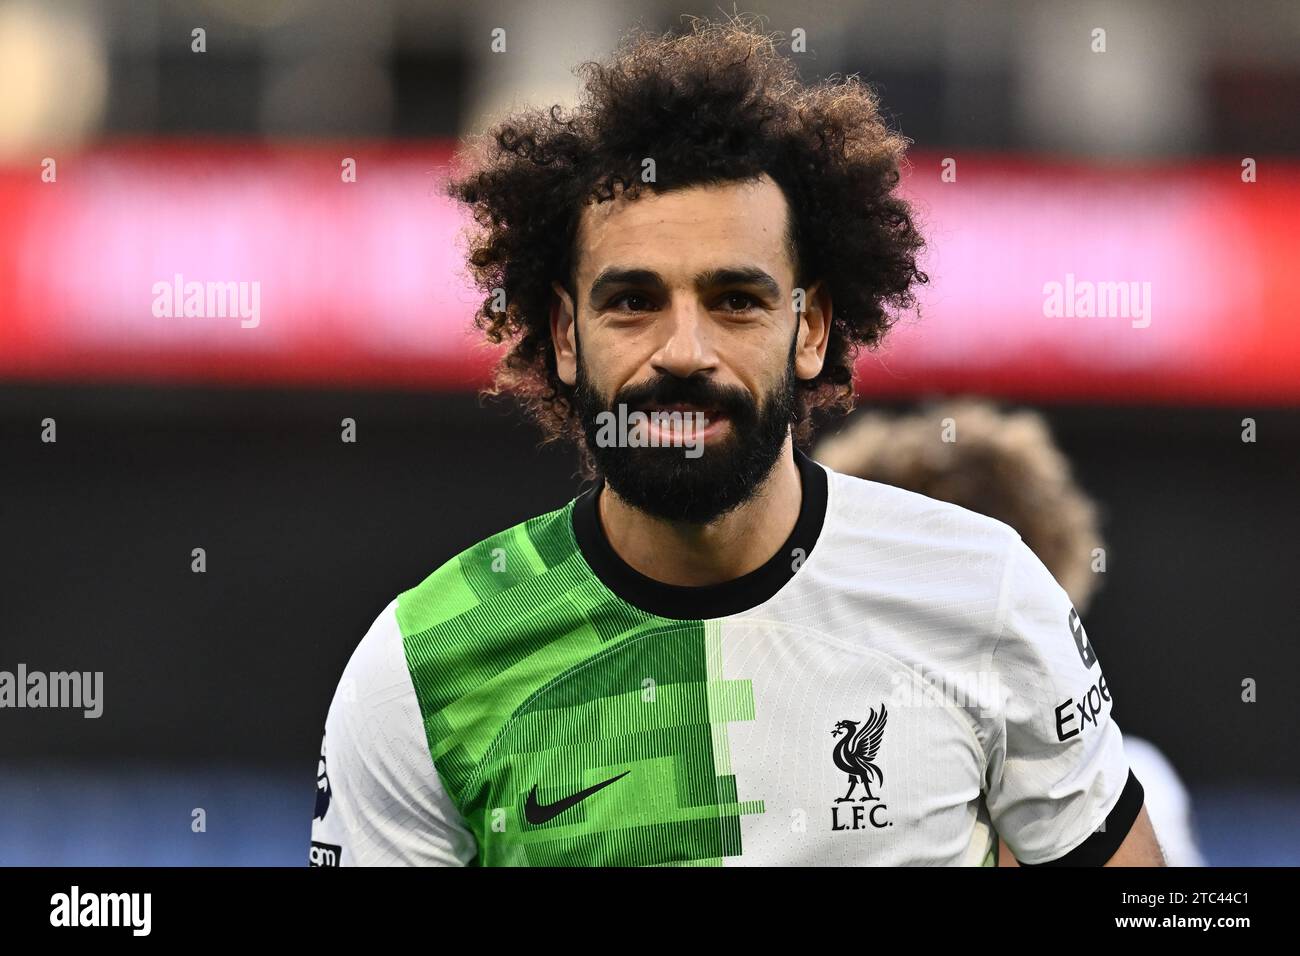 LONDON, ENGLAND - DECEMBER 9: Mohamed Salah of Liverpool FC headshot, head shot, face during the Premier League match between Crystal Palace and Liver Stock Photo